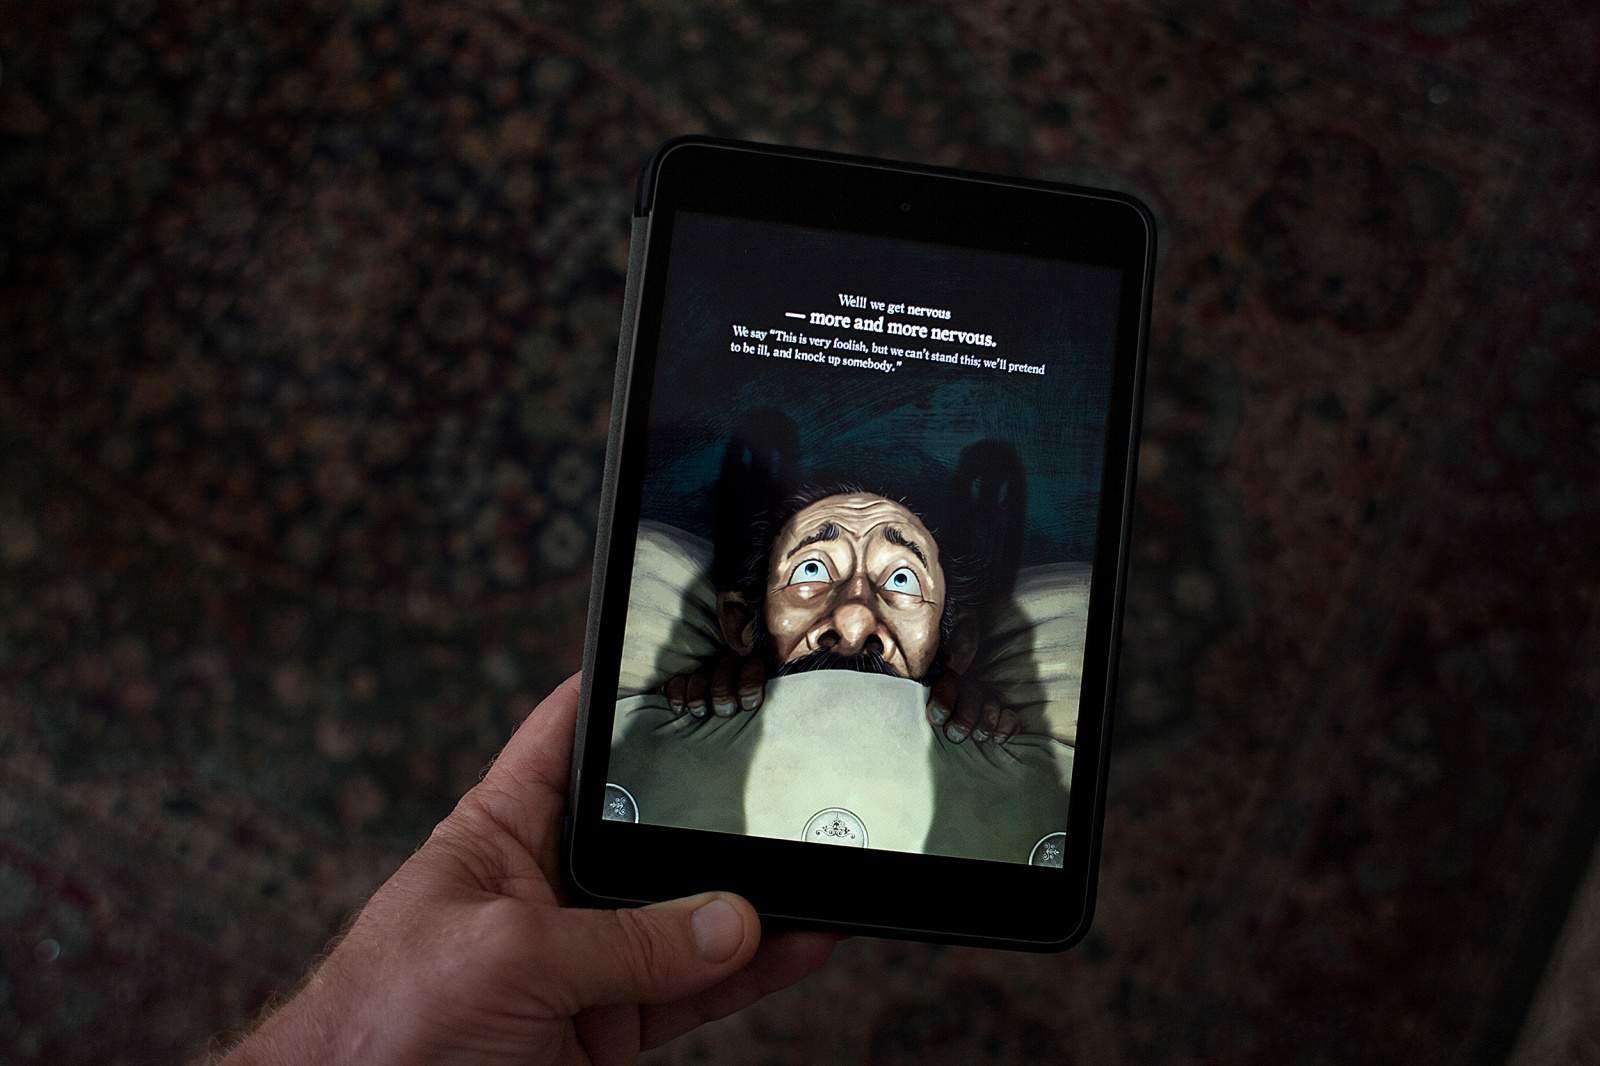 Gently move the iPad and watch the frightened  Charles Dickens character  pull the covers tighter.